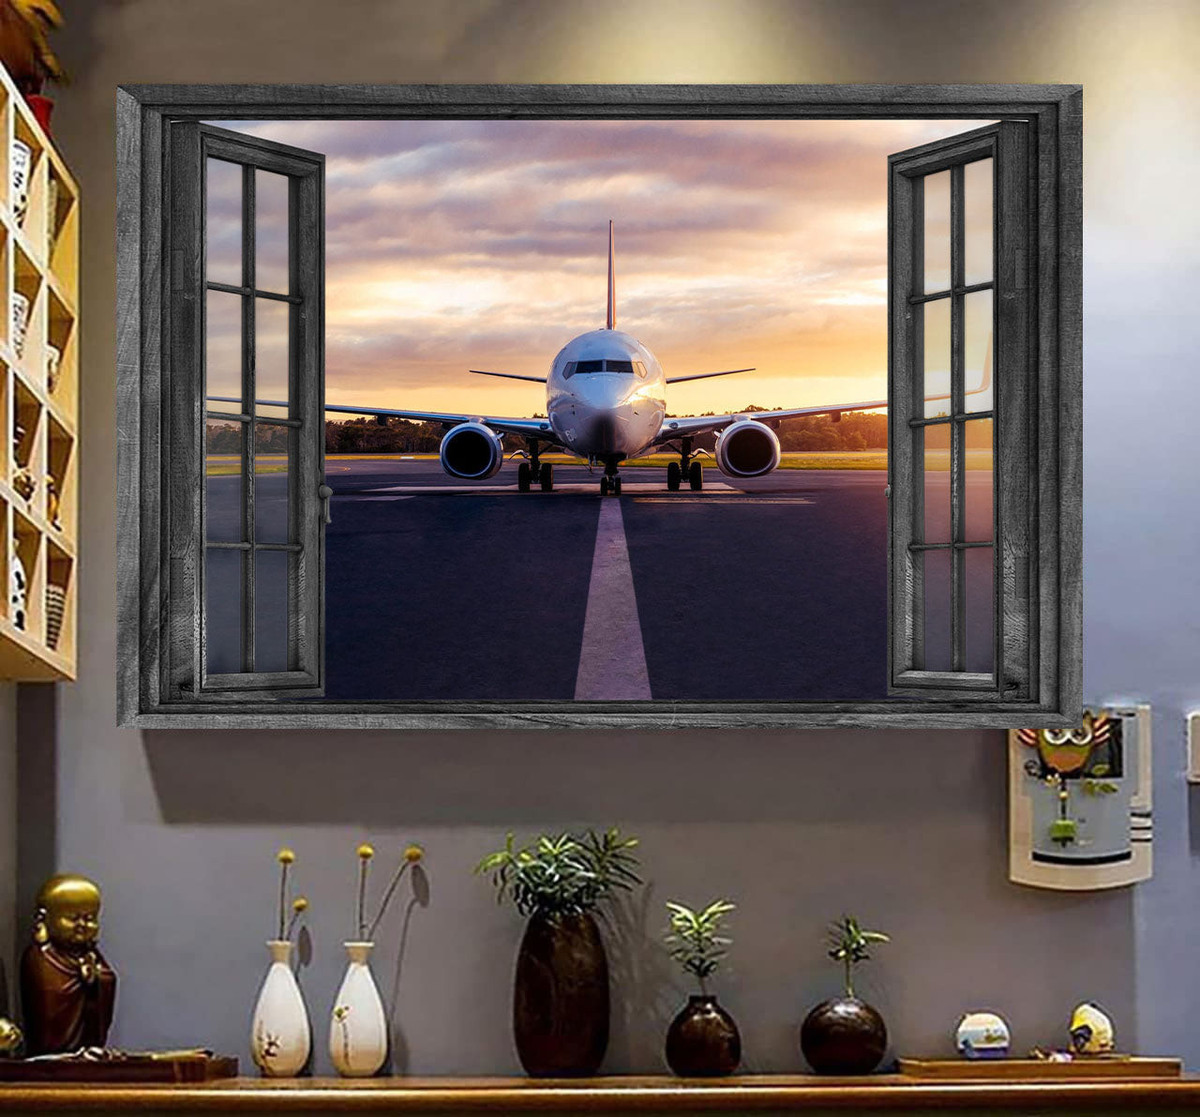 Pilot Canvas Painting Art 3D Window View Print Gift Idea For Your Friend Framed Prints, Canvas Paintings Wrapped Canvas 8x10